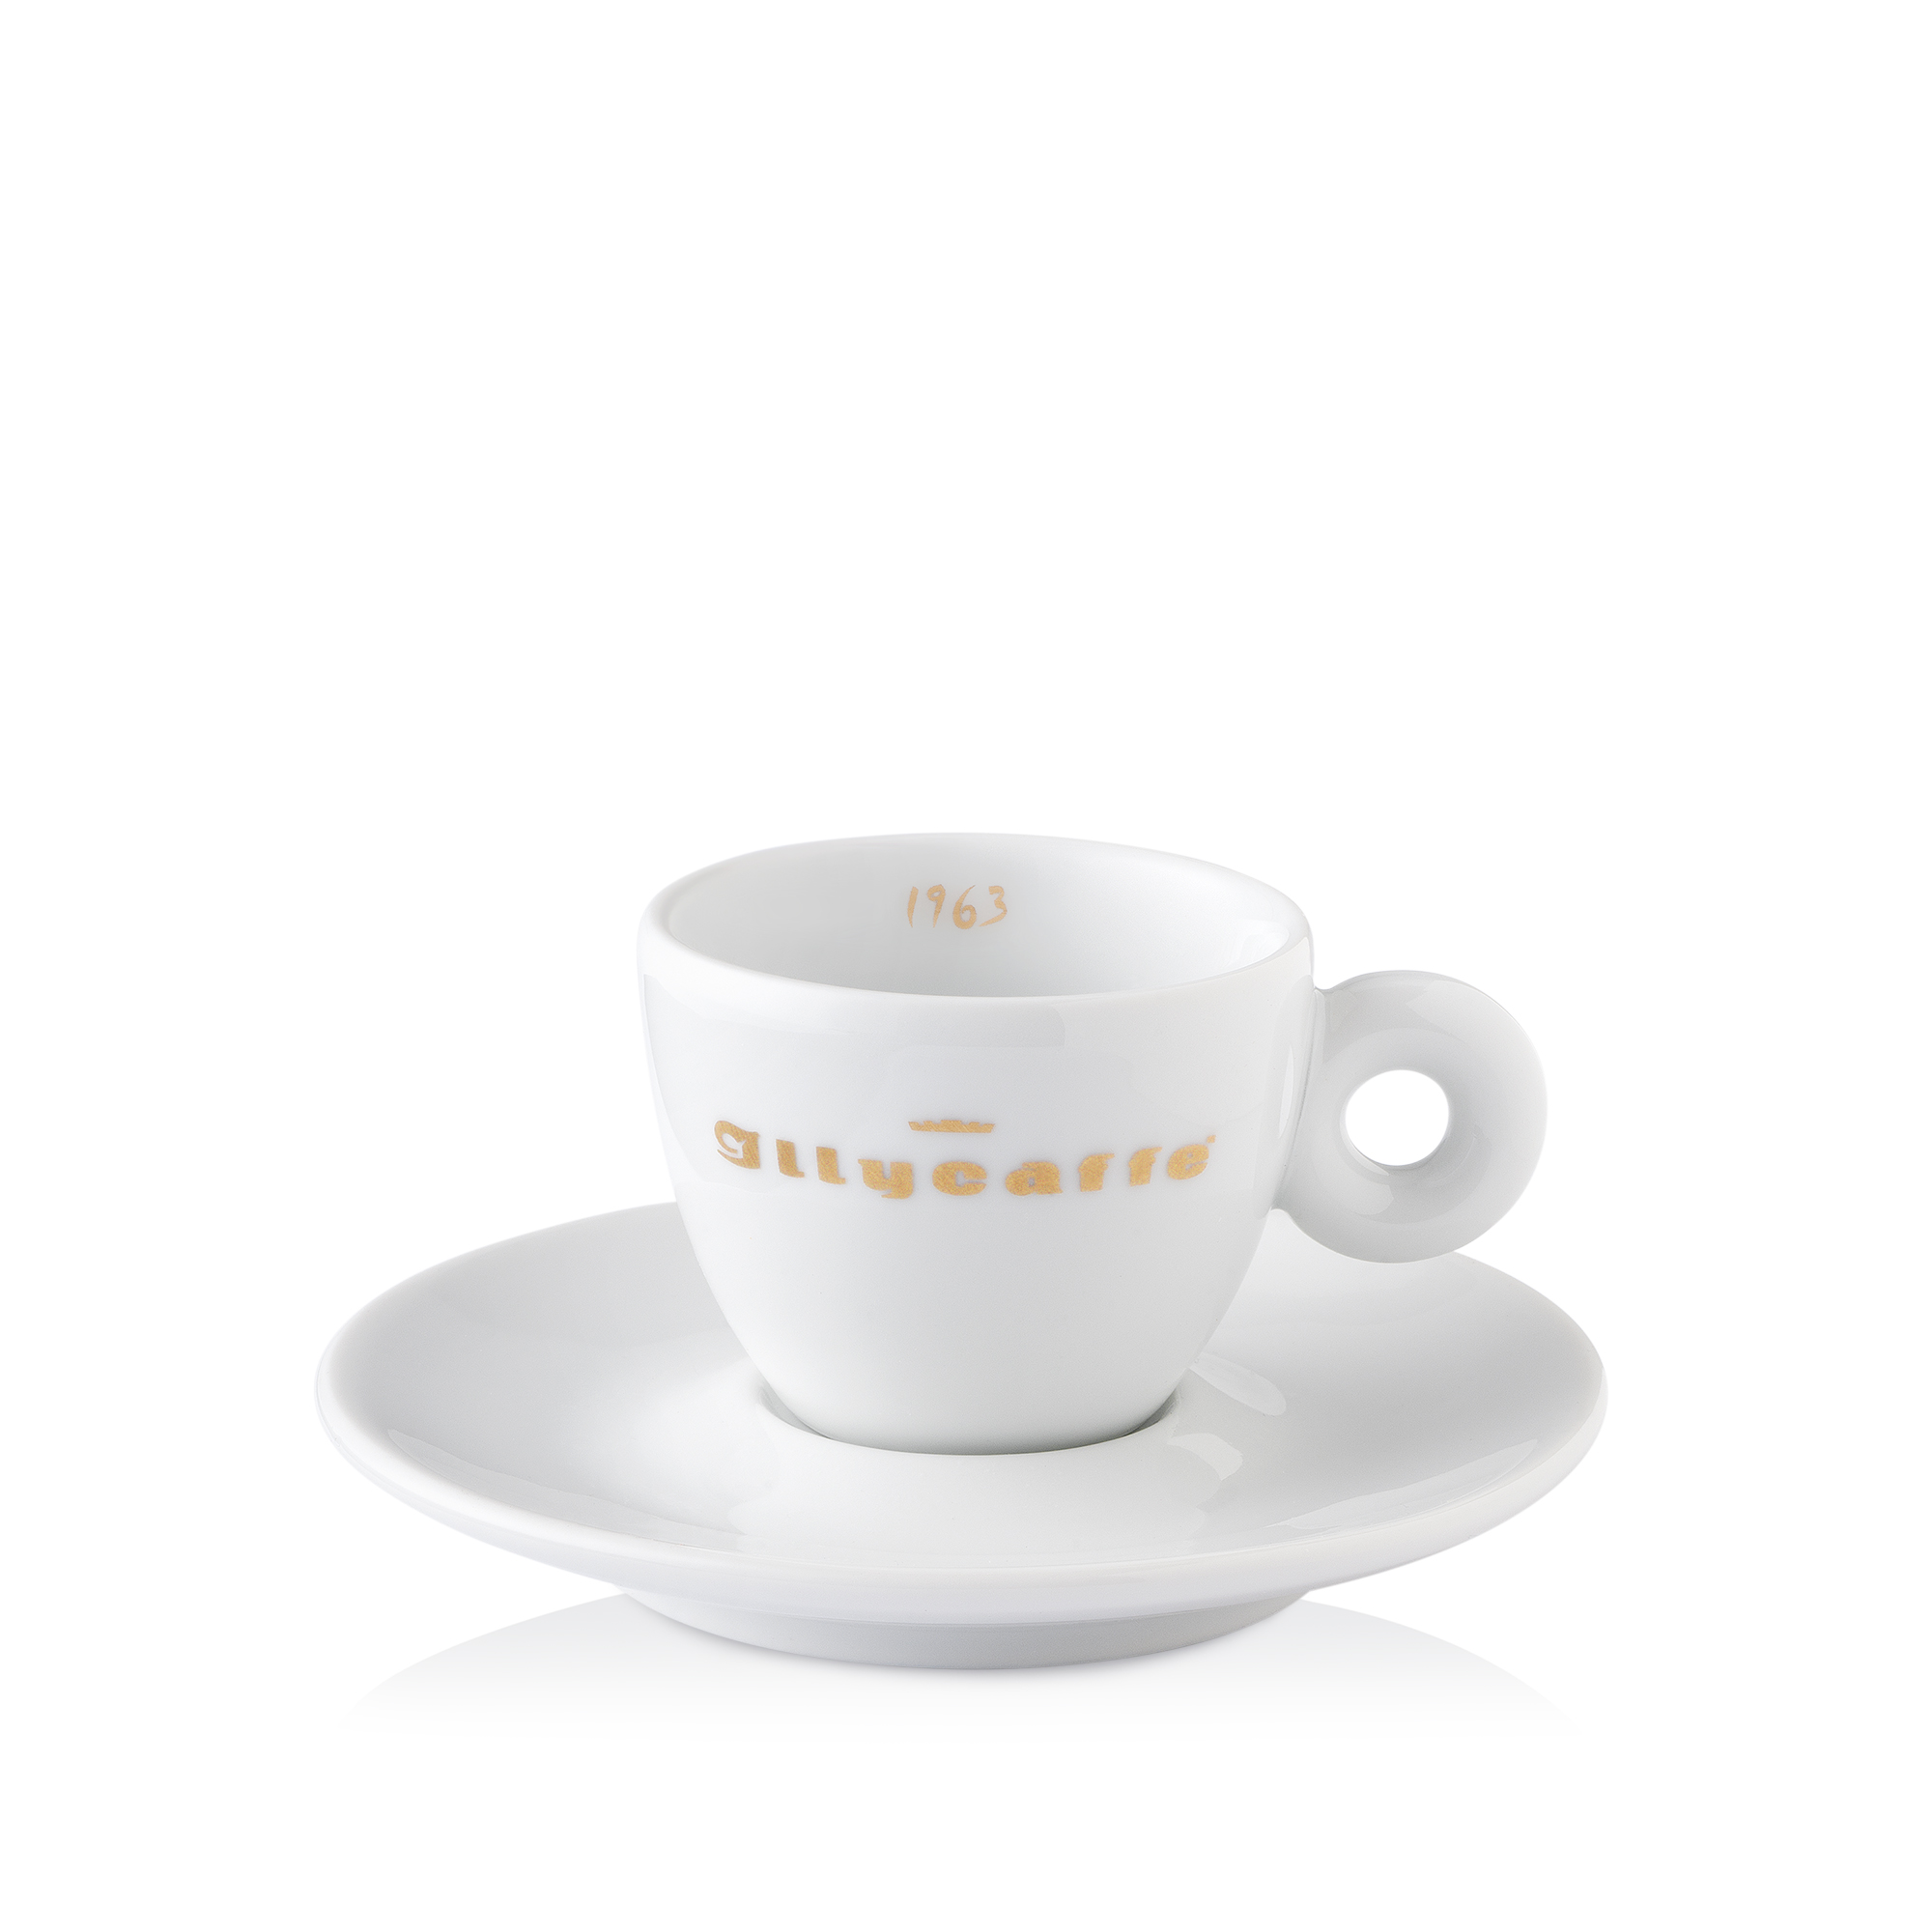 illy Heritage Collection – 6 espressokopjes